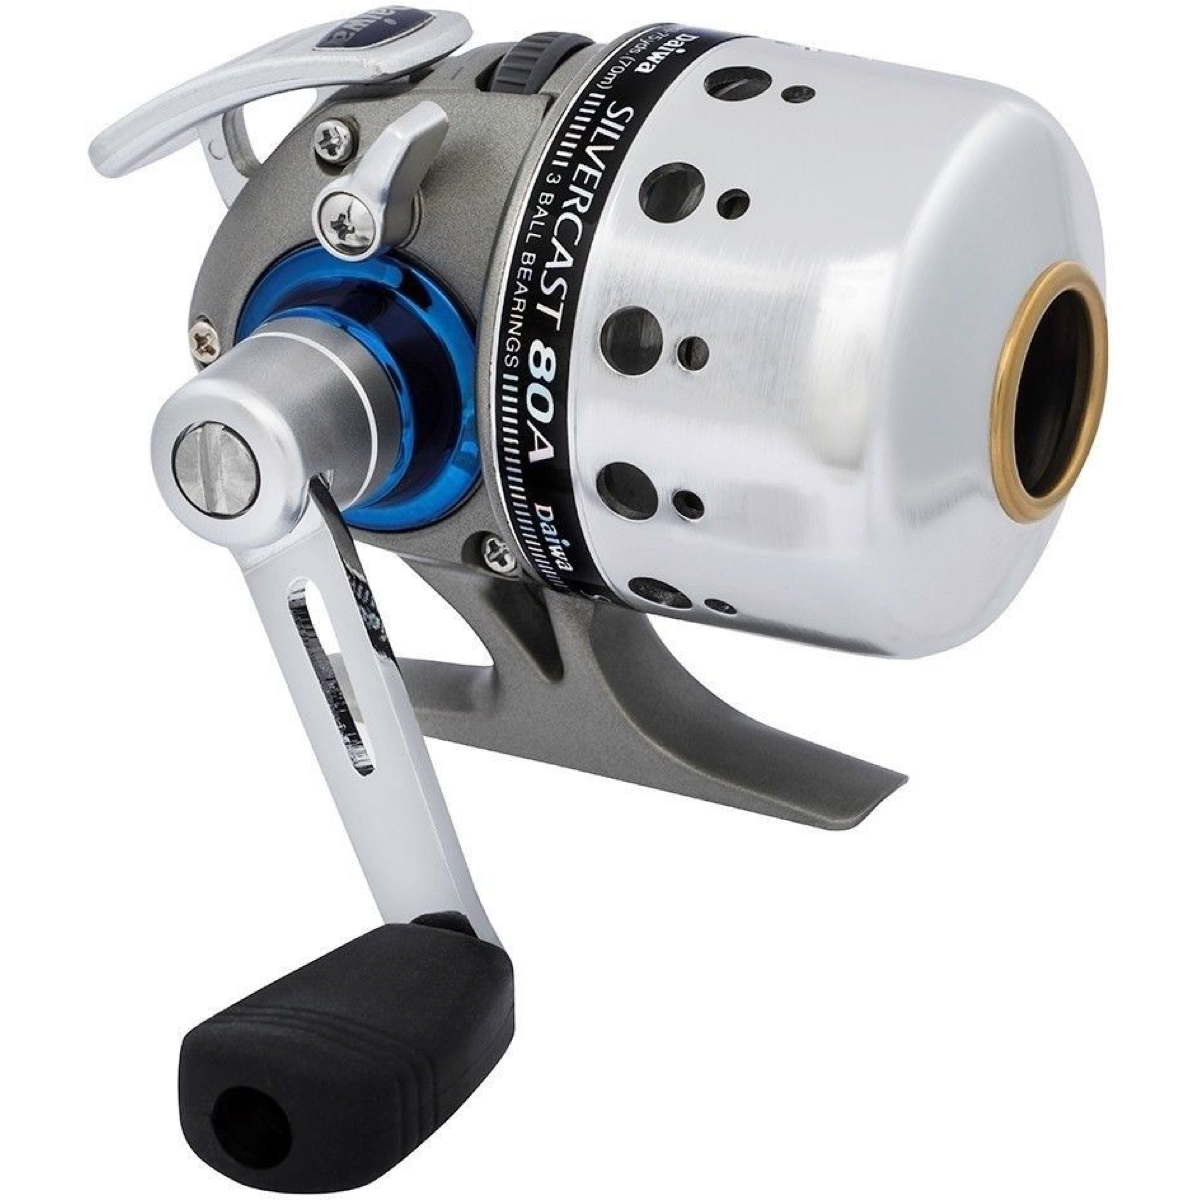 Photo of Daiwa Silvercast-A Spincast Reel for sale at United Tackle Shops.